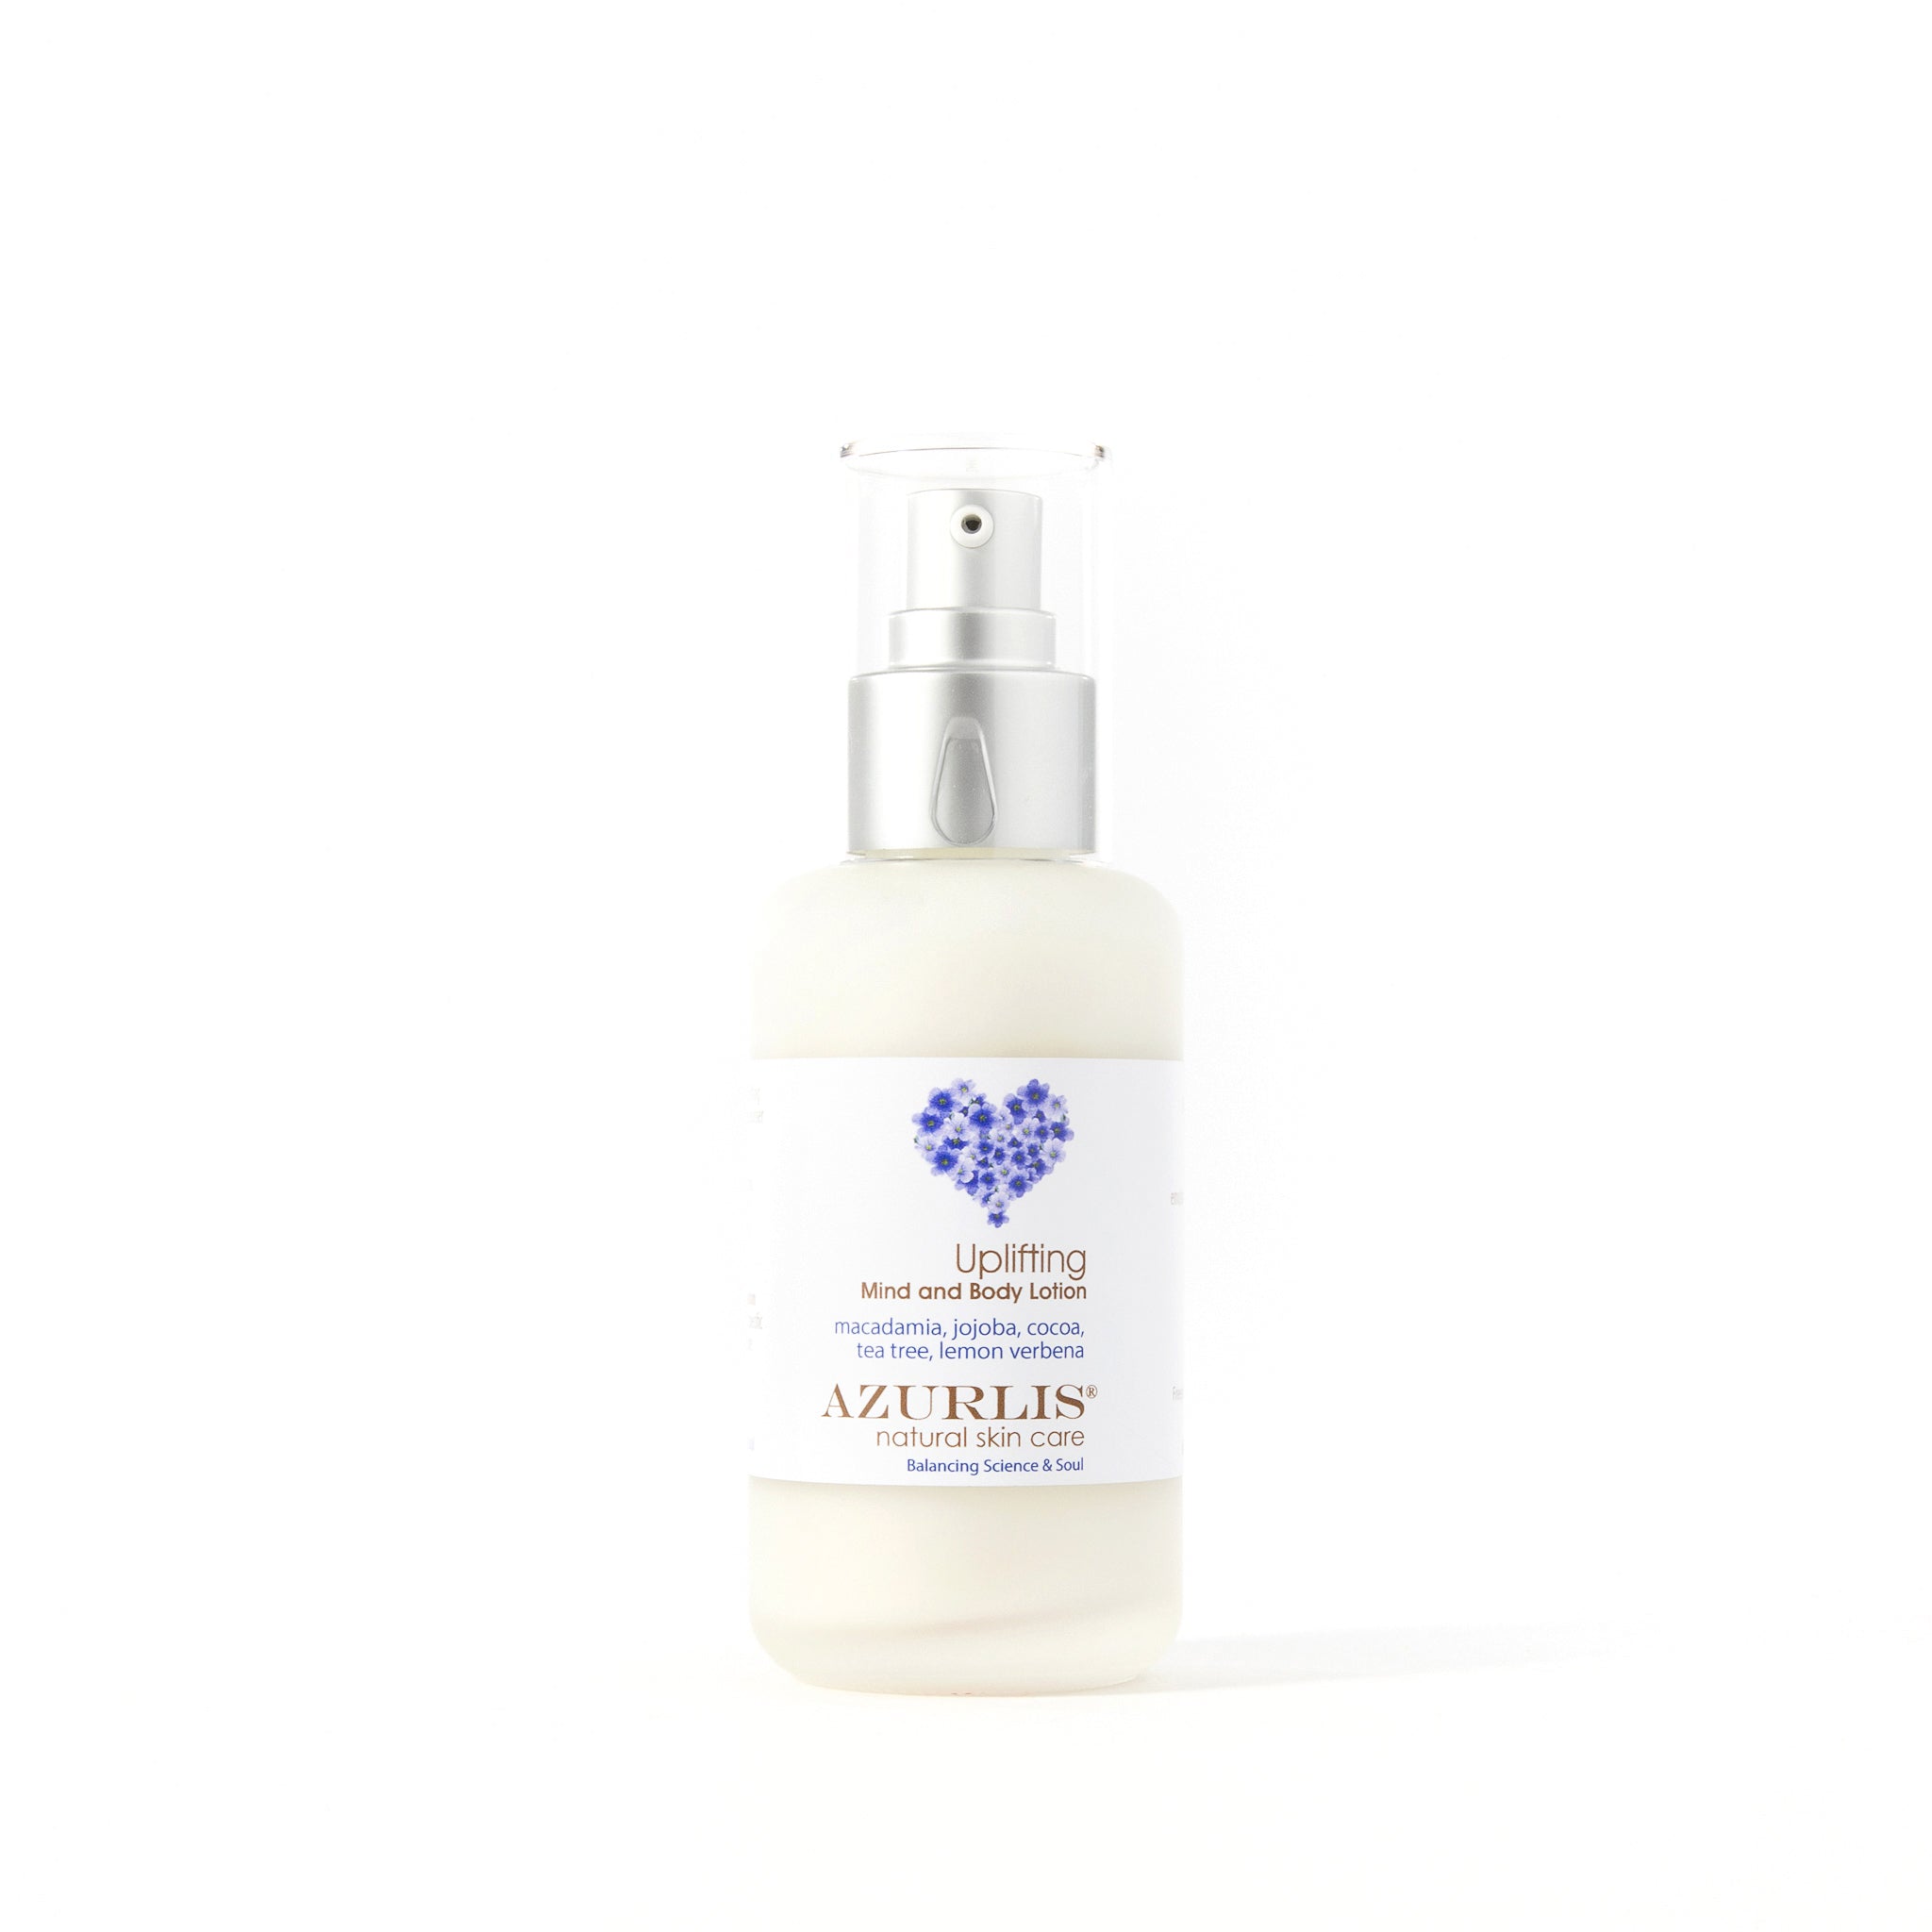 Azurlis™ Uplifting Mind & Body Lotion 100ml provides a wonderful medium to protect the skin all over your body, including dry, hard to soften skin and fine abrasions, especially on your hands and feet.  The softening and emollient properties of macadamia nut and jojoba oils are ideal to make your skin feel wonderfully moisturised and soft. NZ tea tree and lemon verbena essential oils are also shielding due to their mild antiseptic properties.